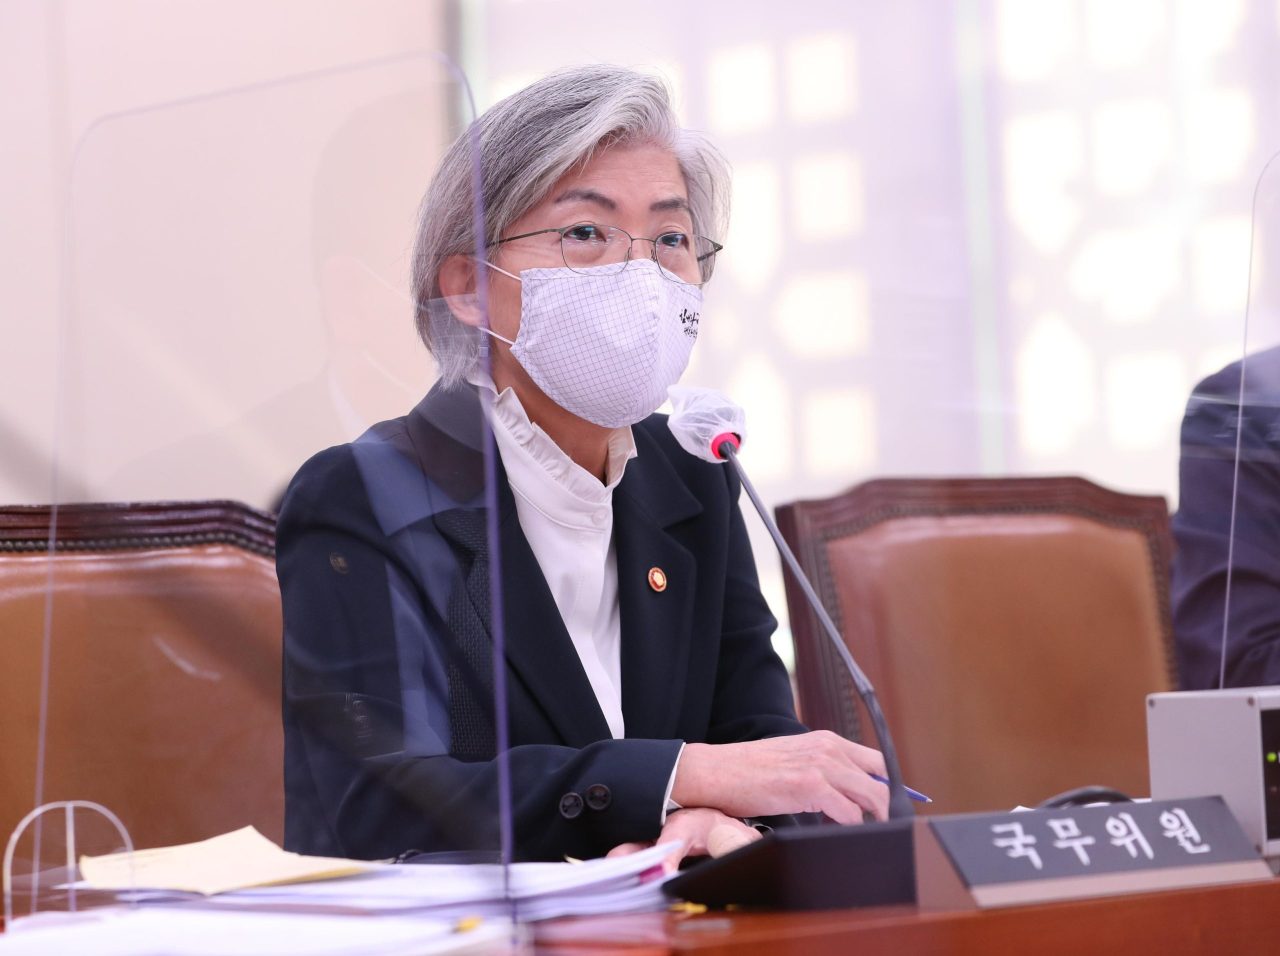 Foreign Minister Kang Kyung-wha speaks during a parliamentary audit at the National Assembly in Seoul on Oct. 26, 2020. (Yonhap)